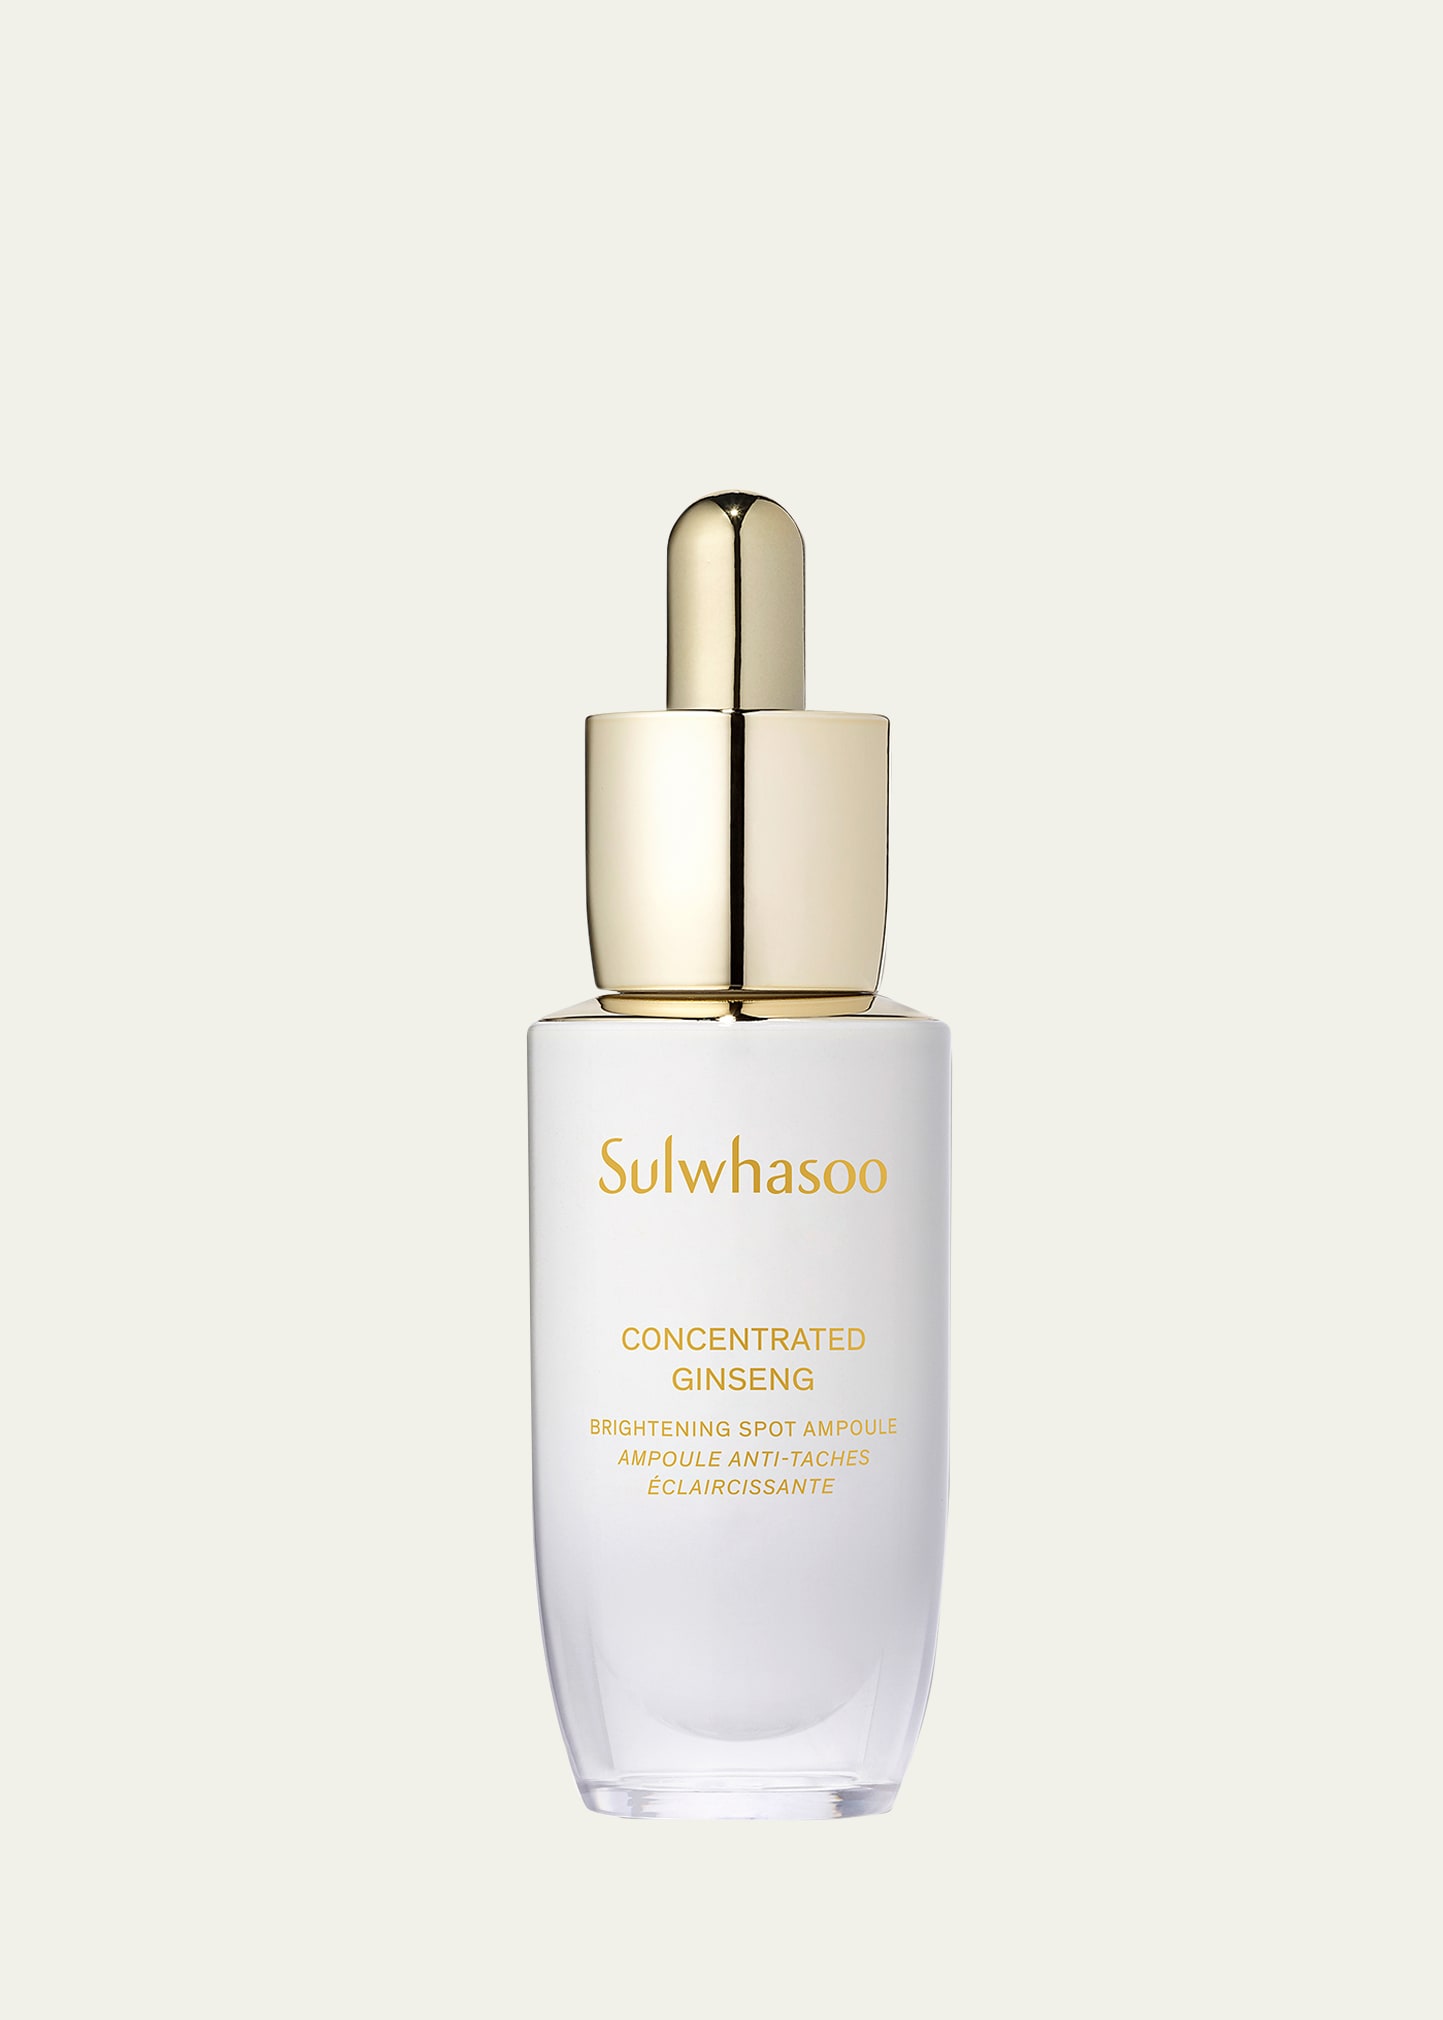 Sulwhasoo Concentrated Ginseng Brightening Spot Ampoule, 0.67 Oz.